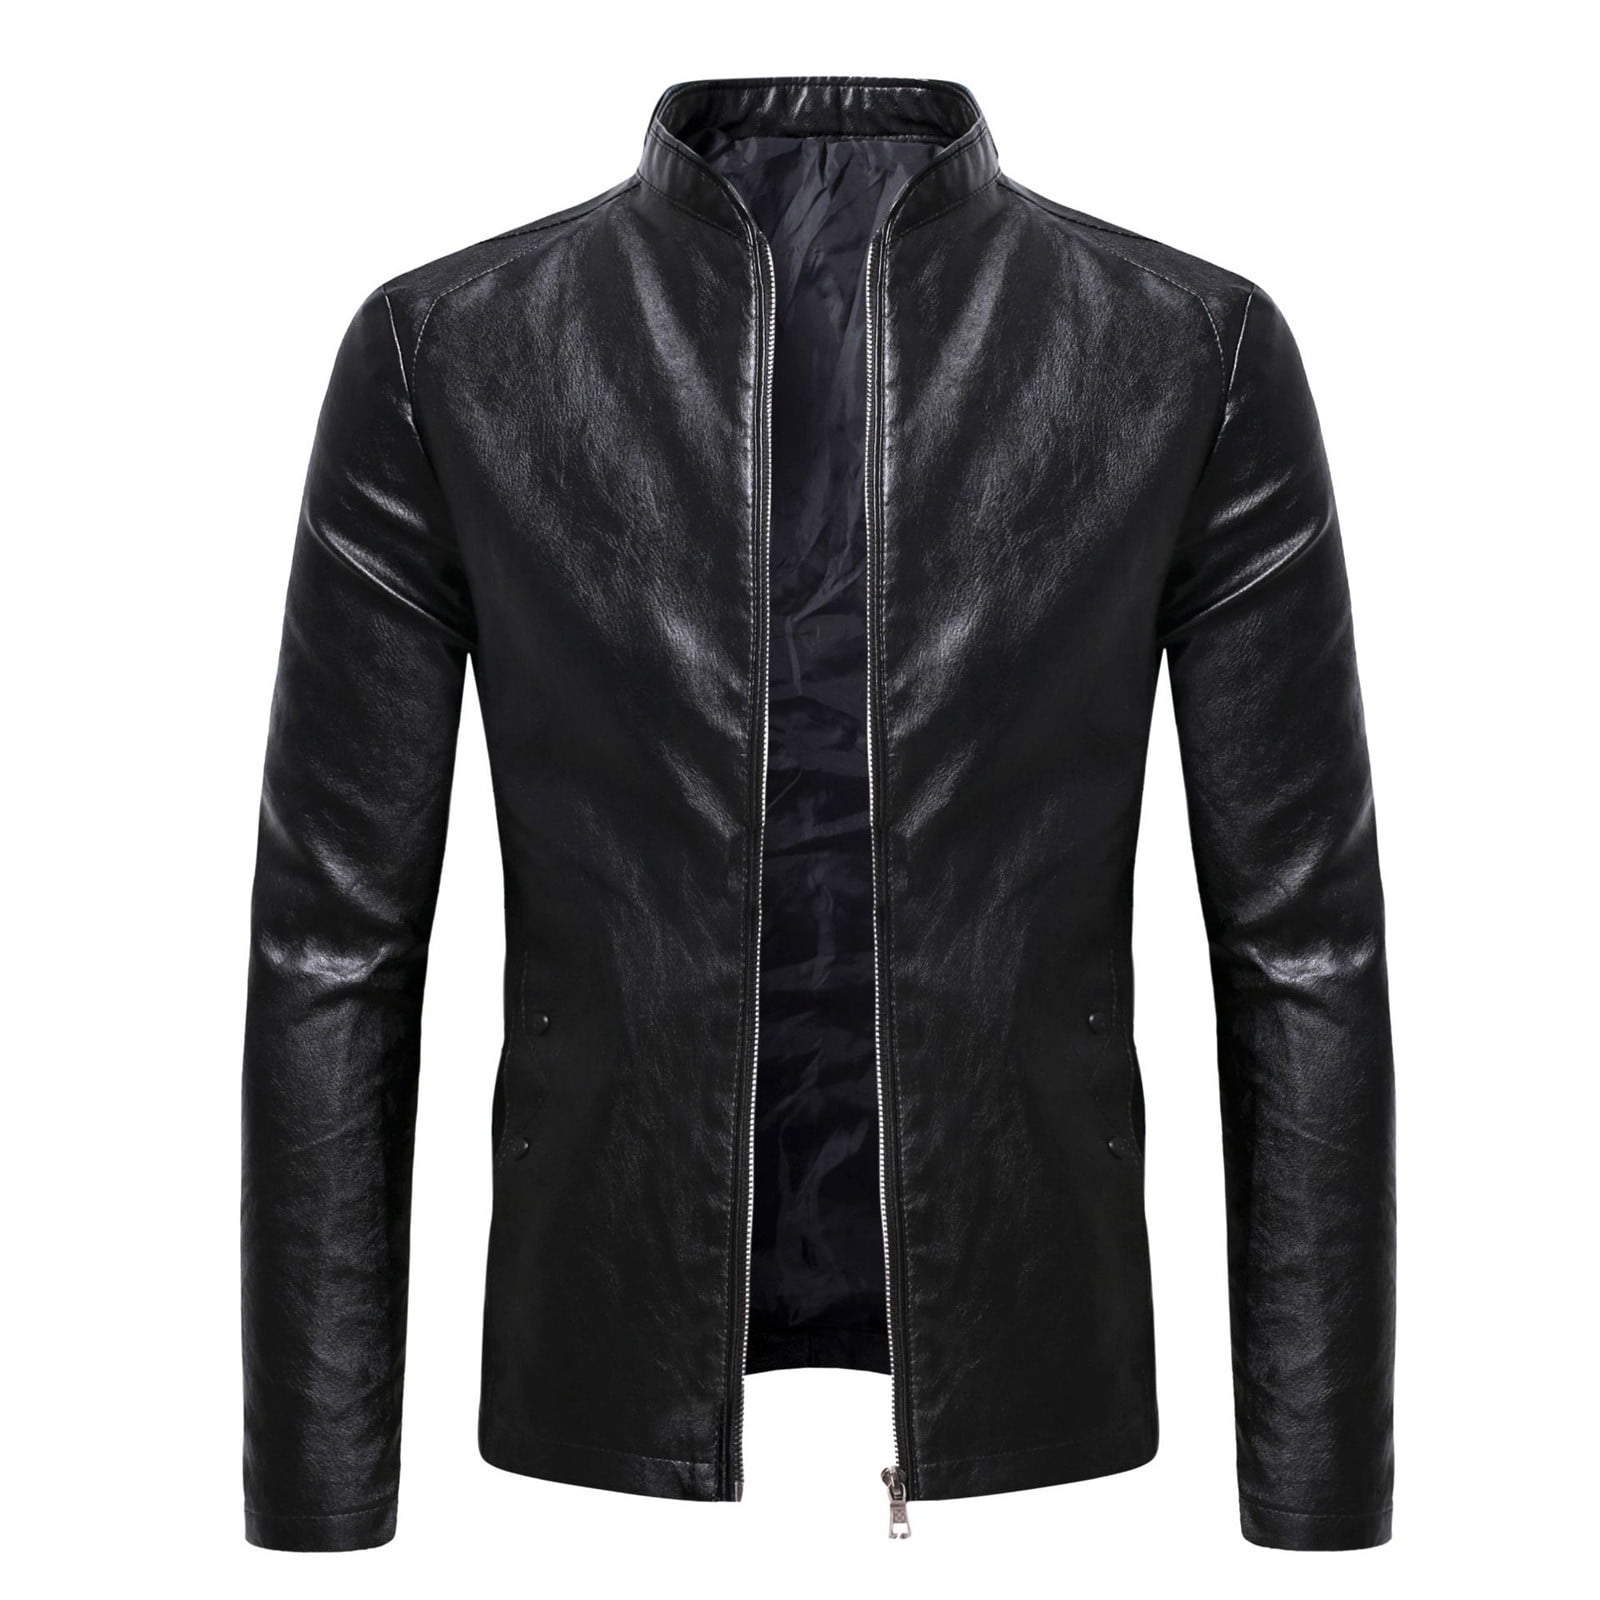 Men's Smooth Faux Leather Jacket Slim Fit Stand Collar Zip Up